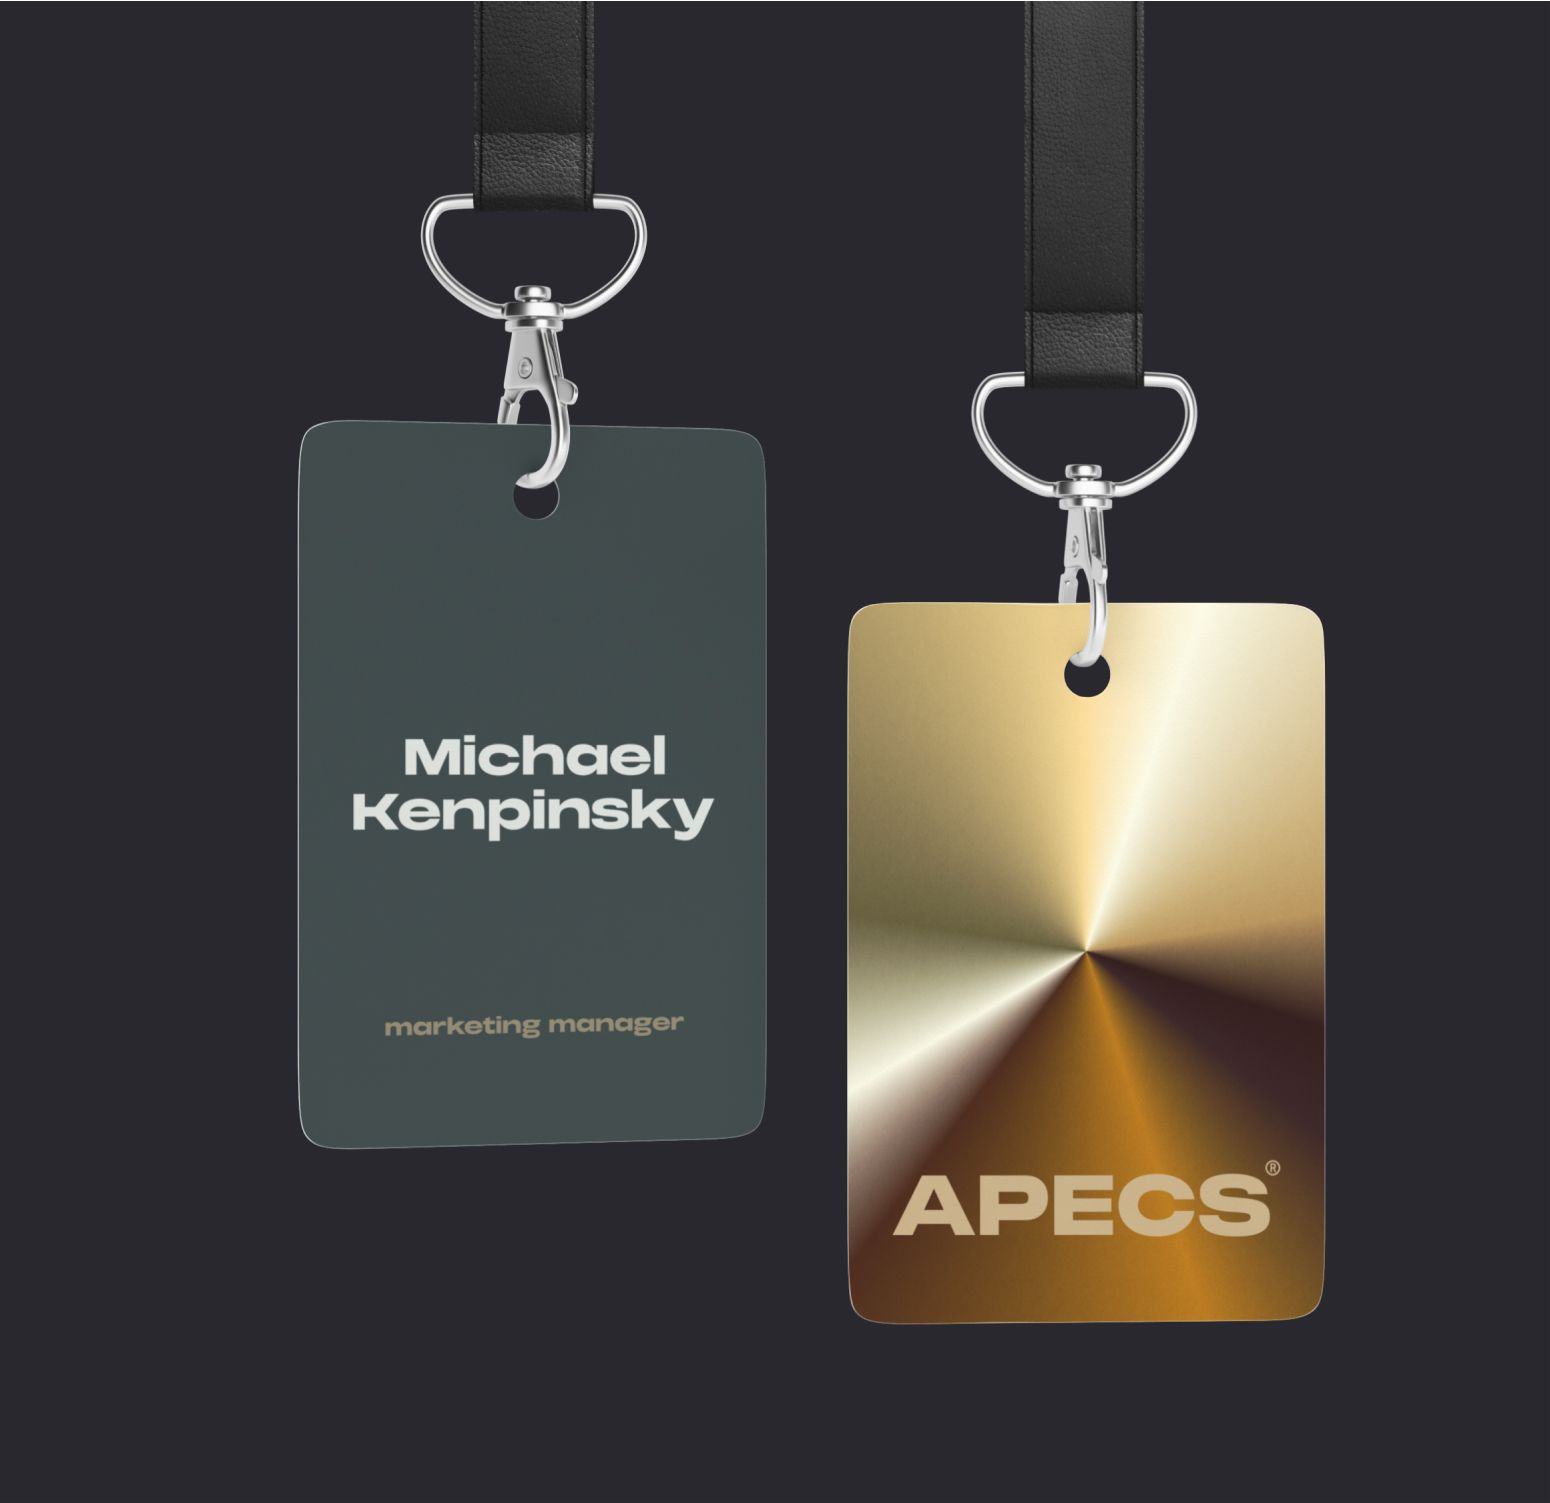 Apecs conference cards